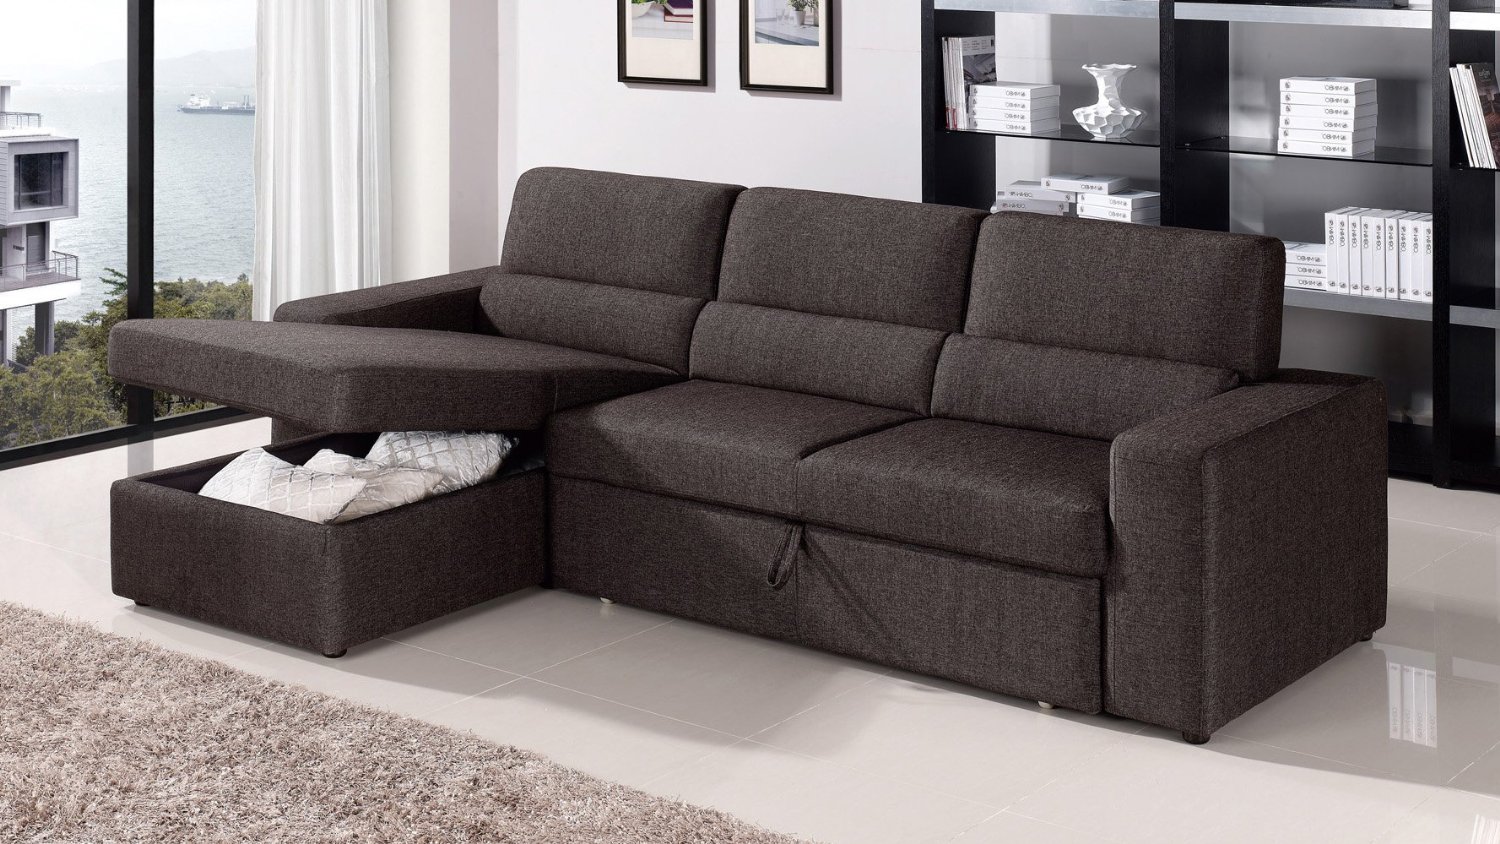 Sofa bed cut great sectional sofa beds cool living room remodeling concept with interior OYHNGTF